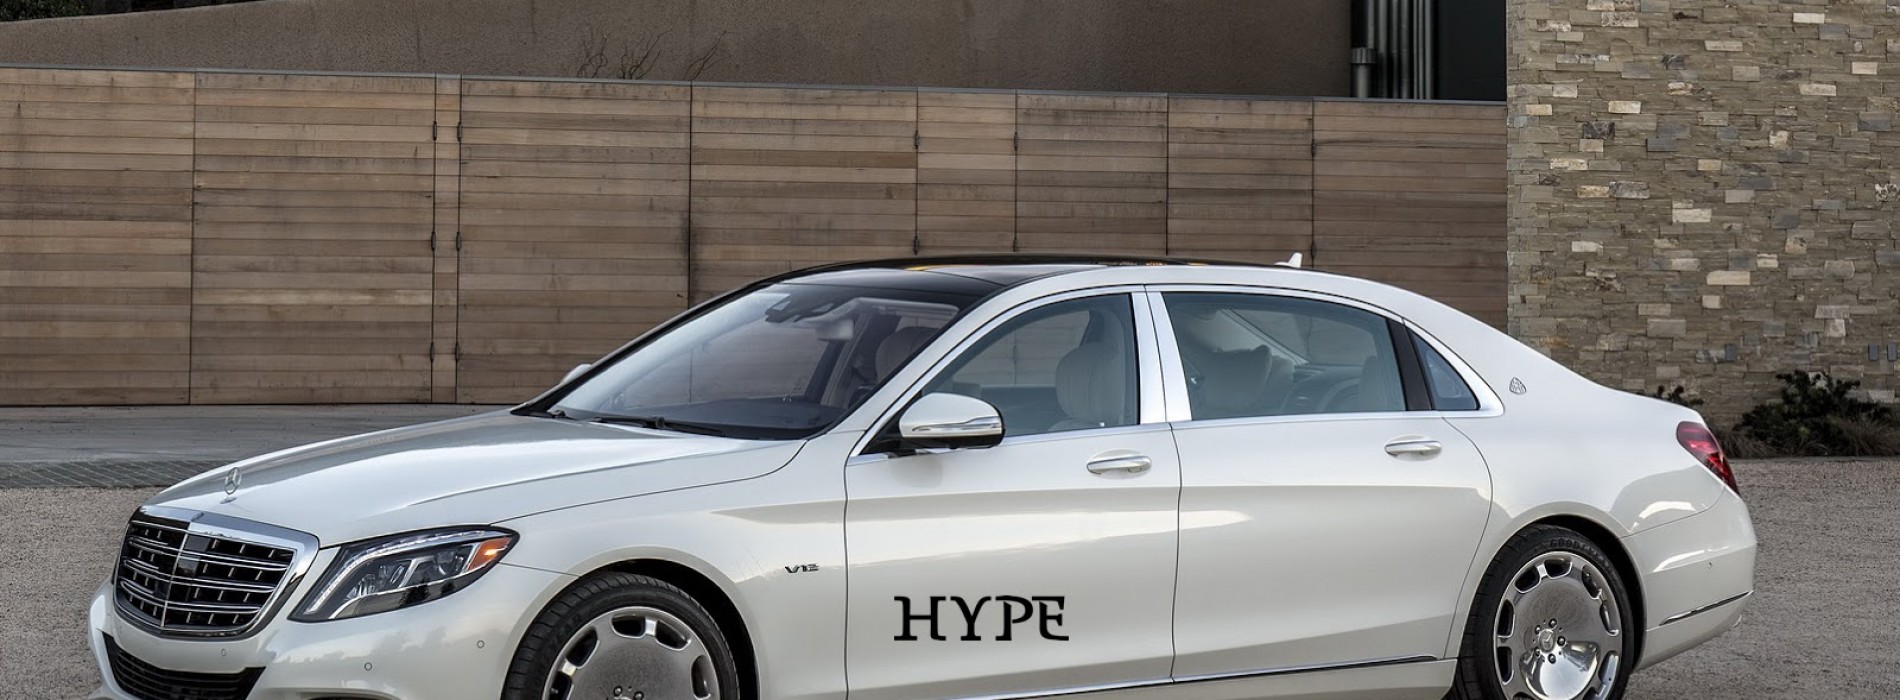 Gift your dad a day with his dream car using HYPE